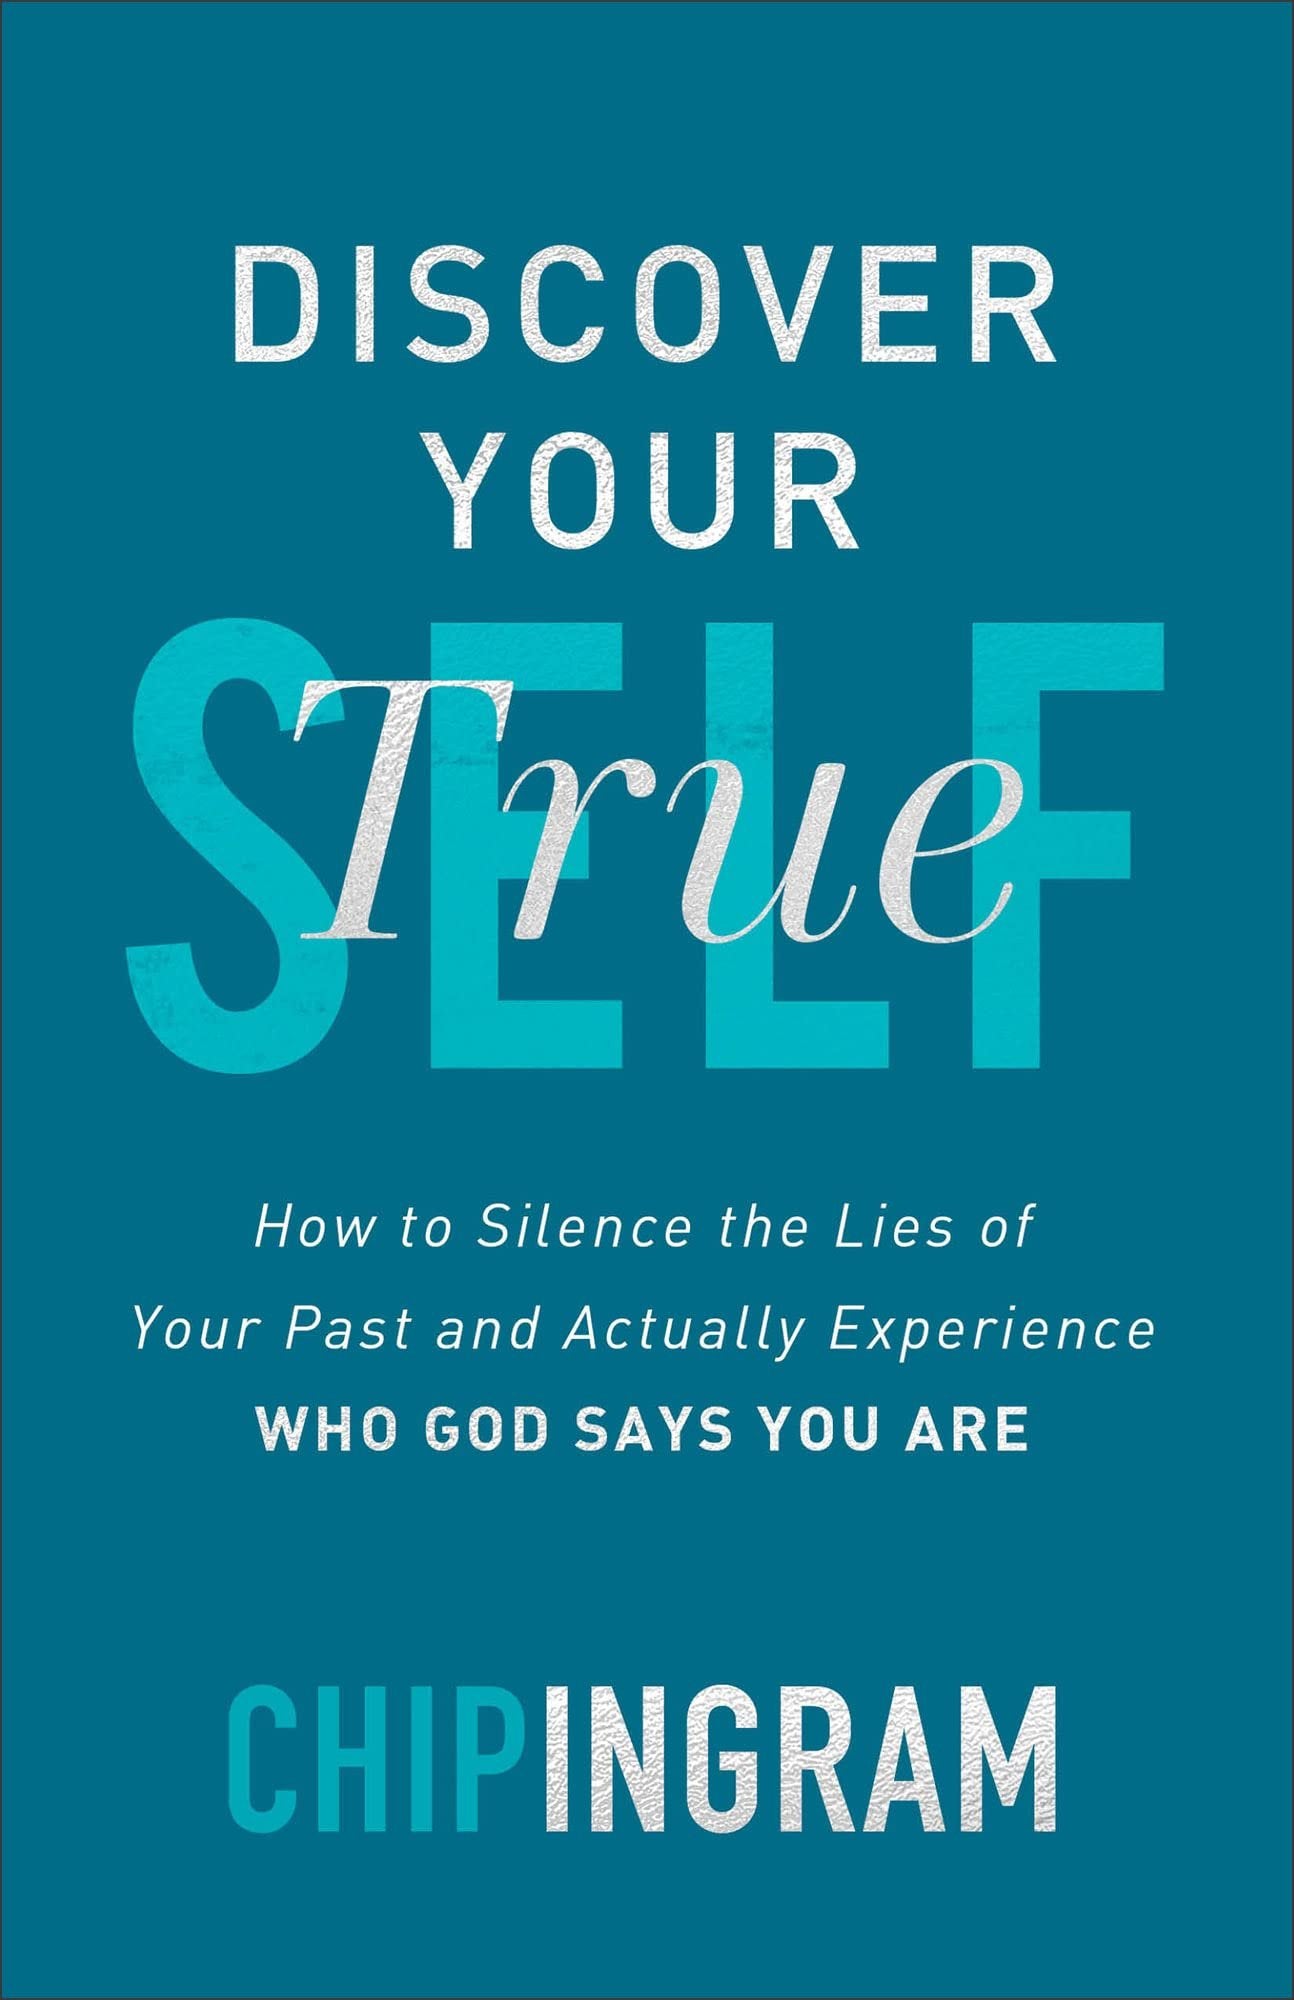 Unlock Your Potential with "Discover Your True Self" by Chip Ingram